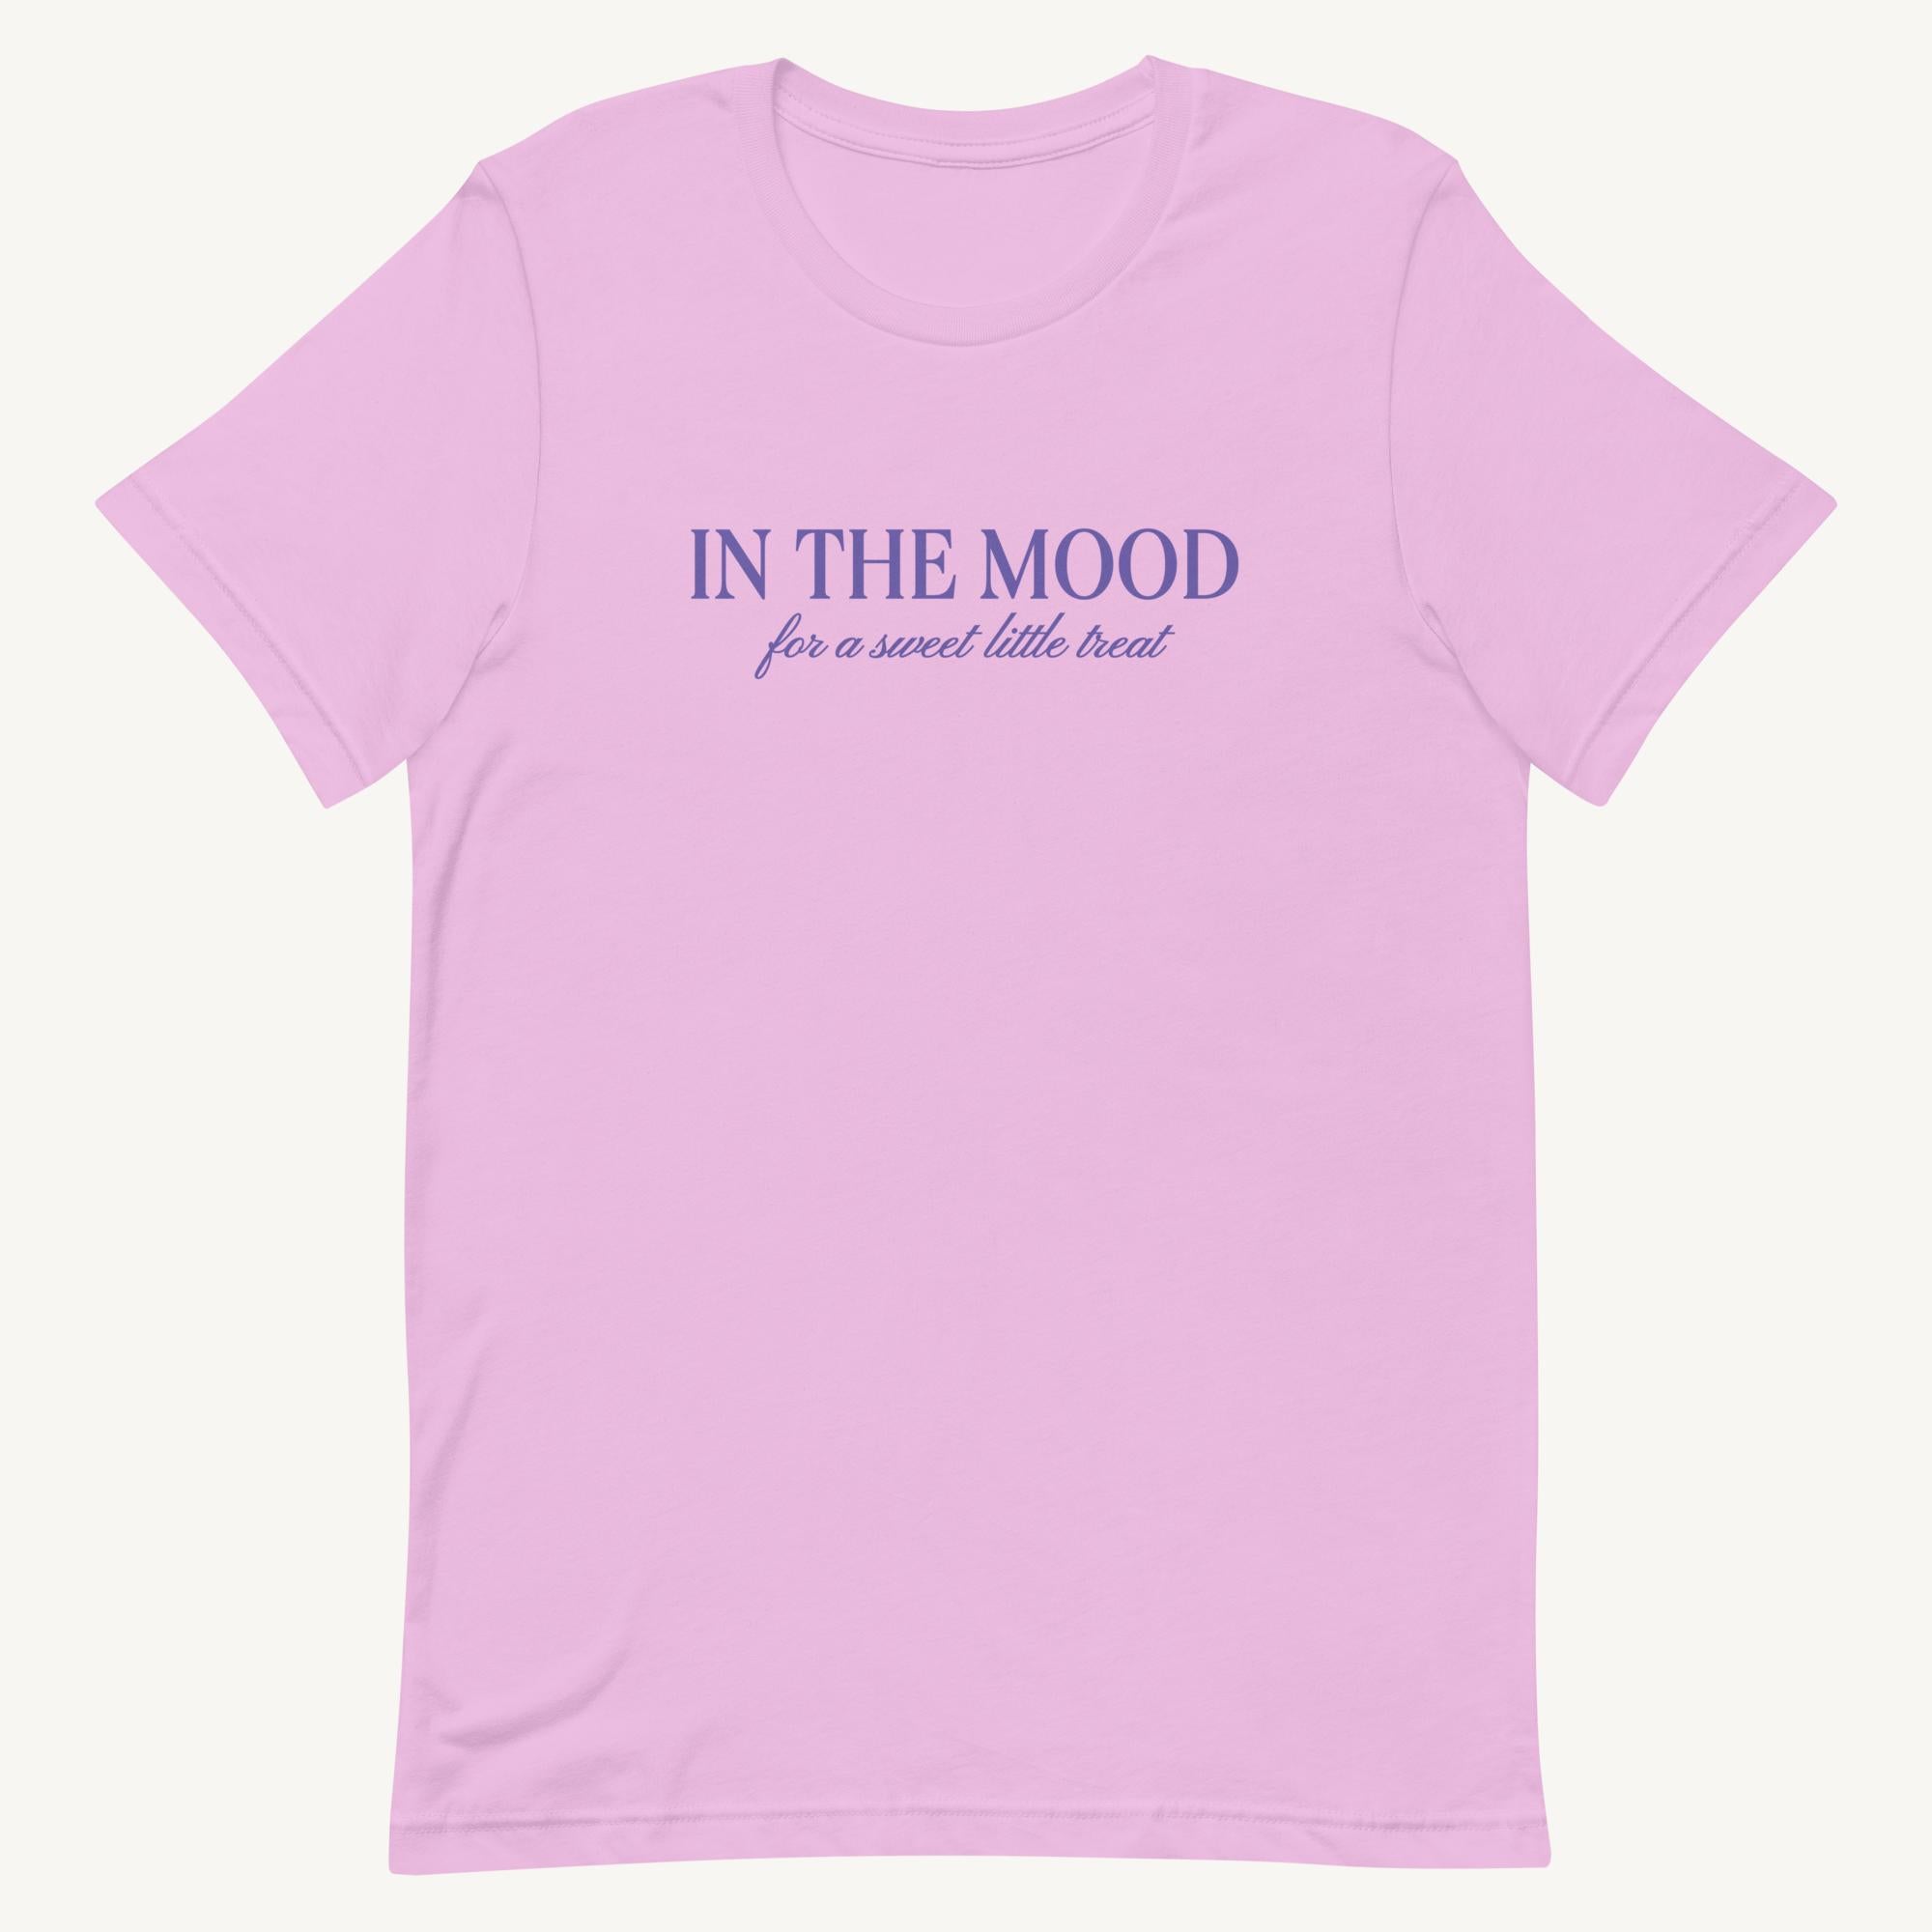 In The Mood Graphic Tee